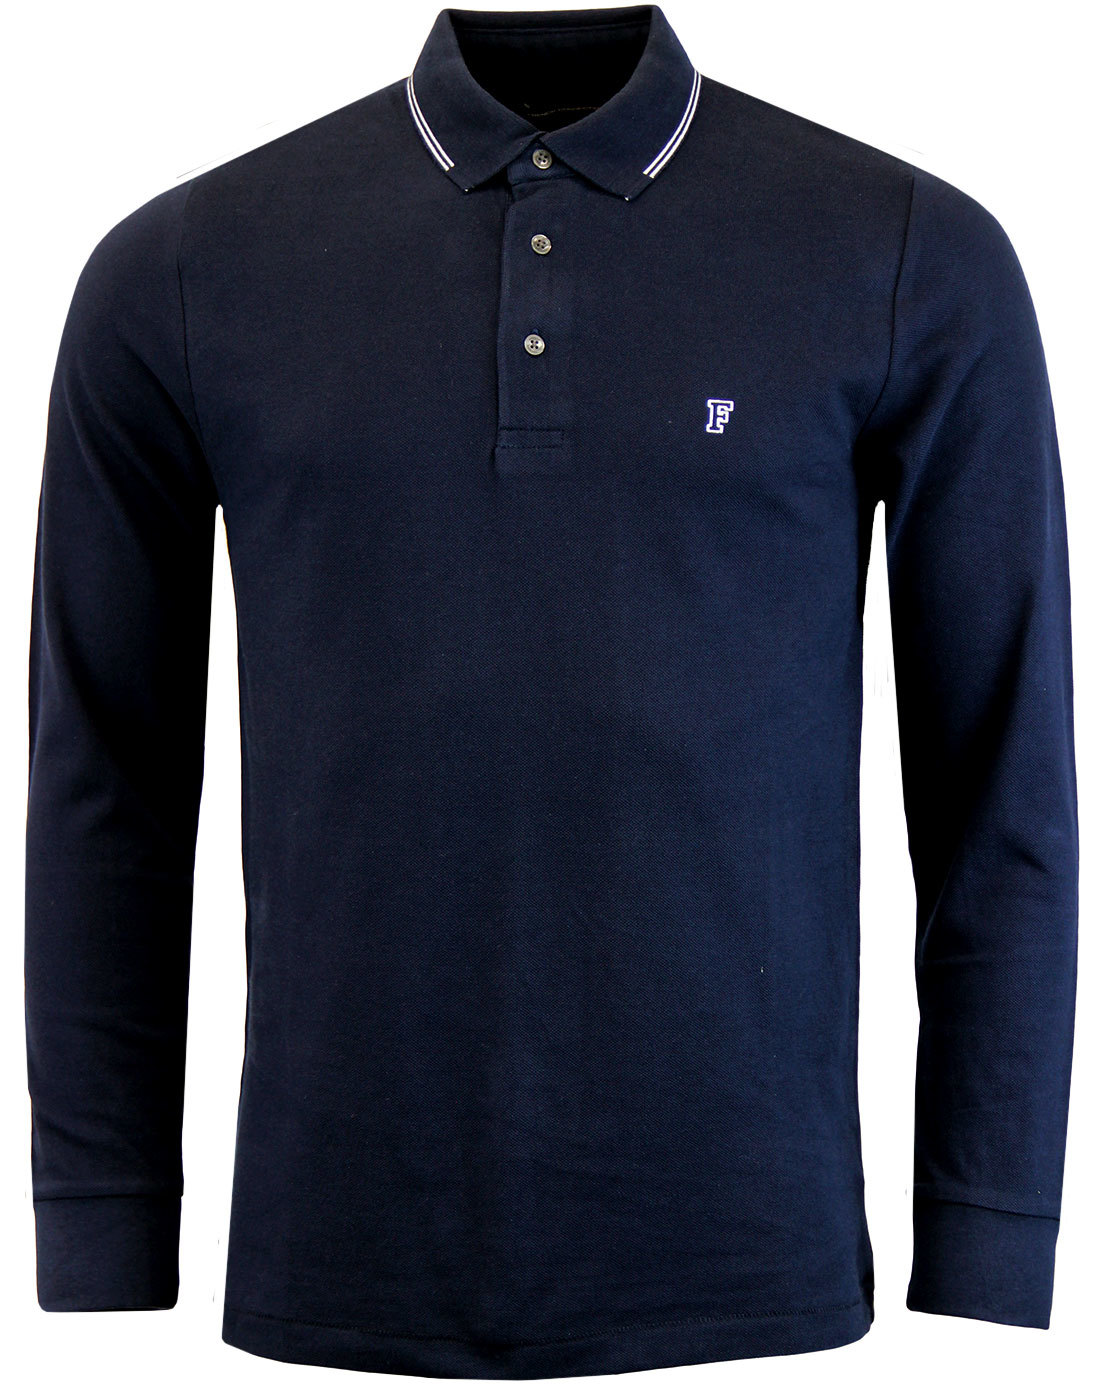 FRENCH CONNECTION Retro Mod Twin Tip LS Pique Polo